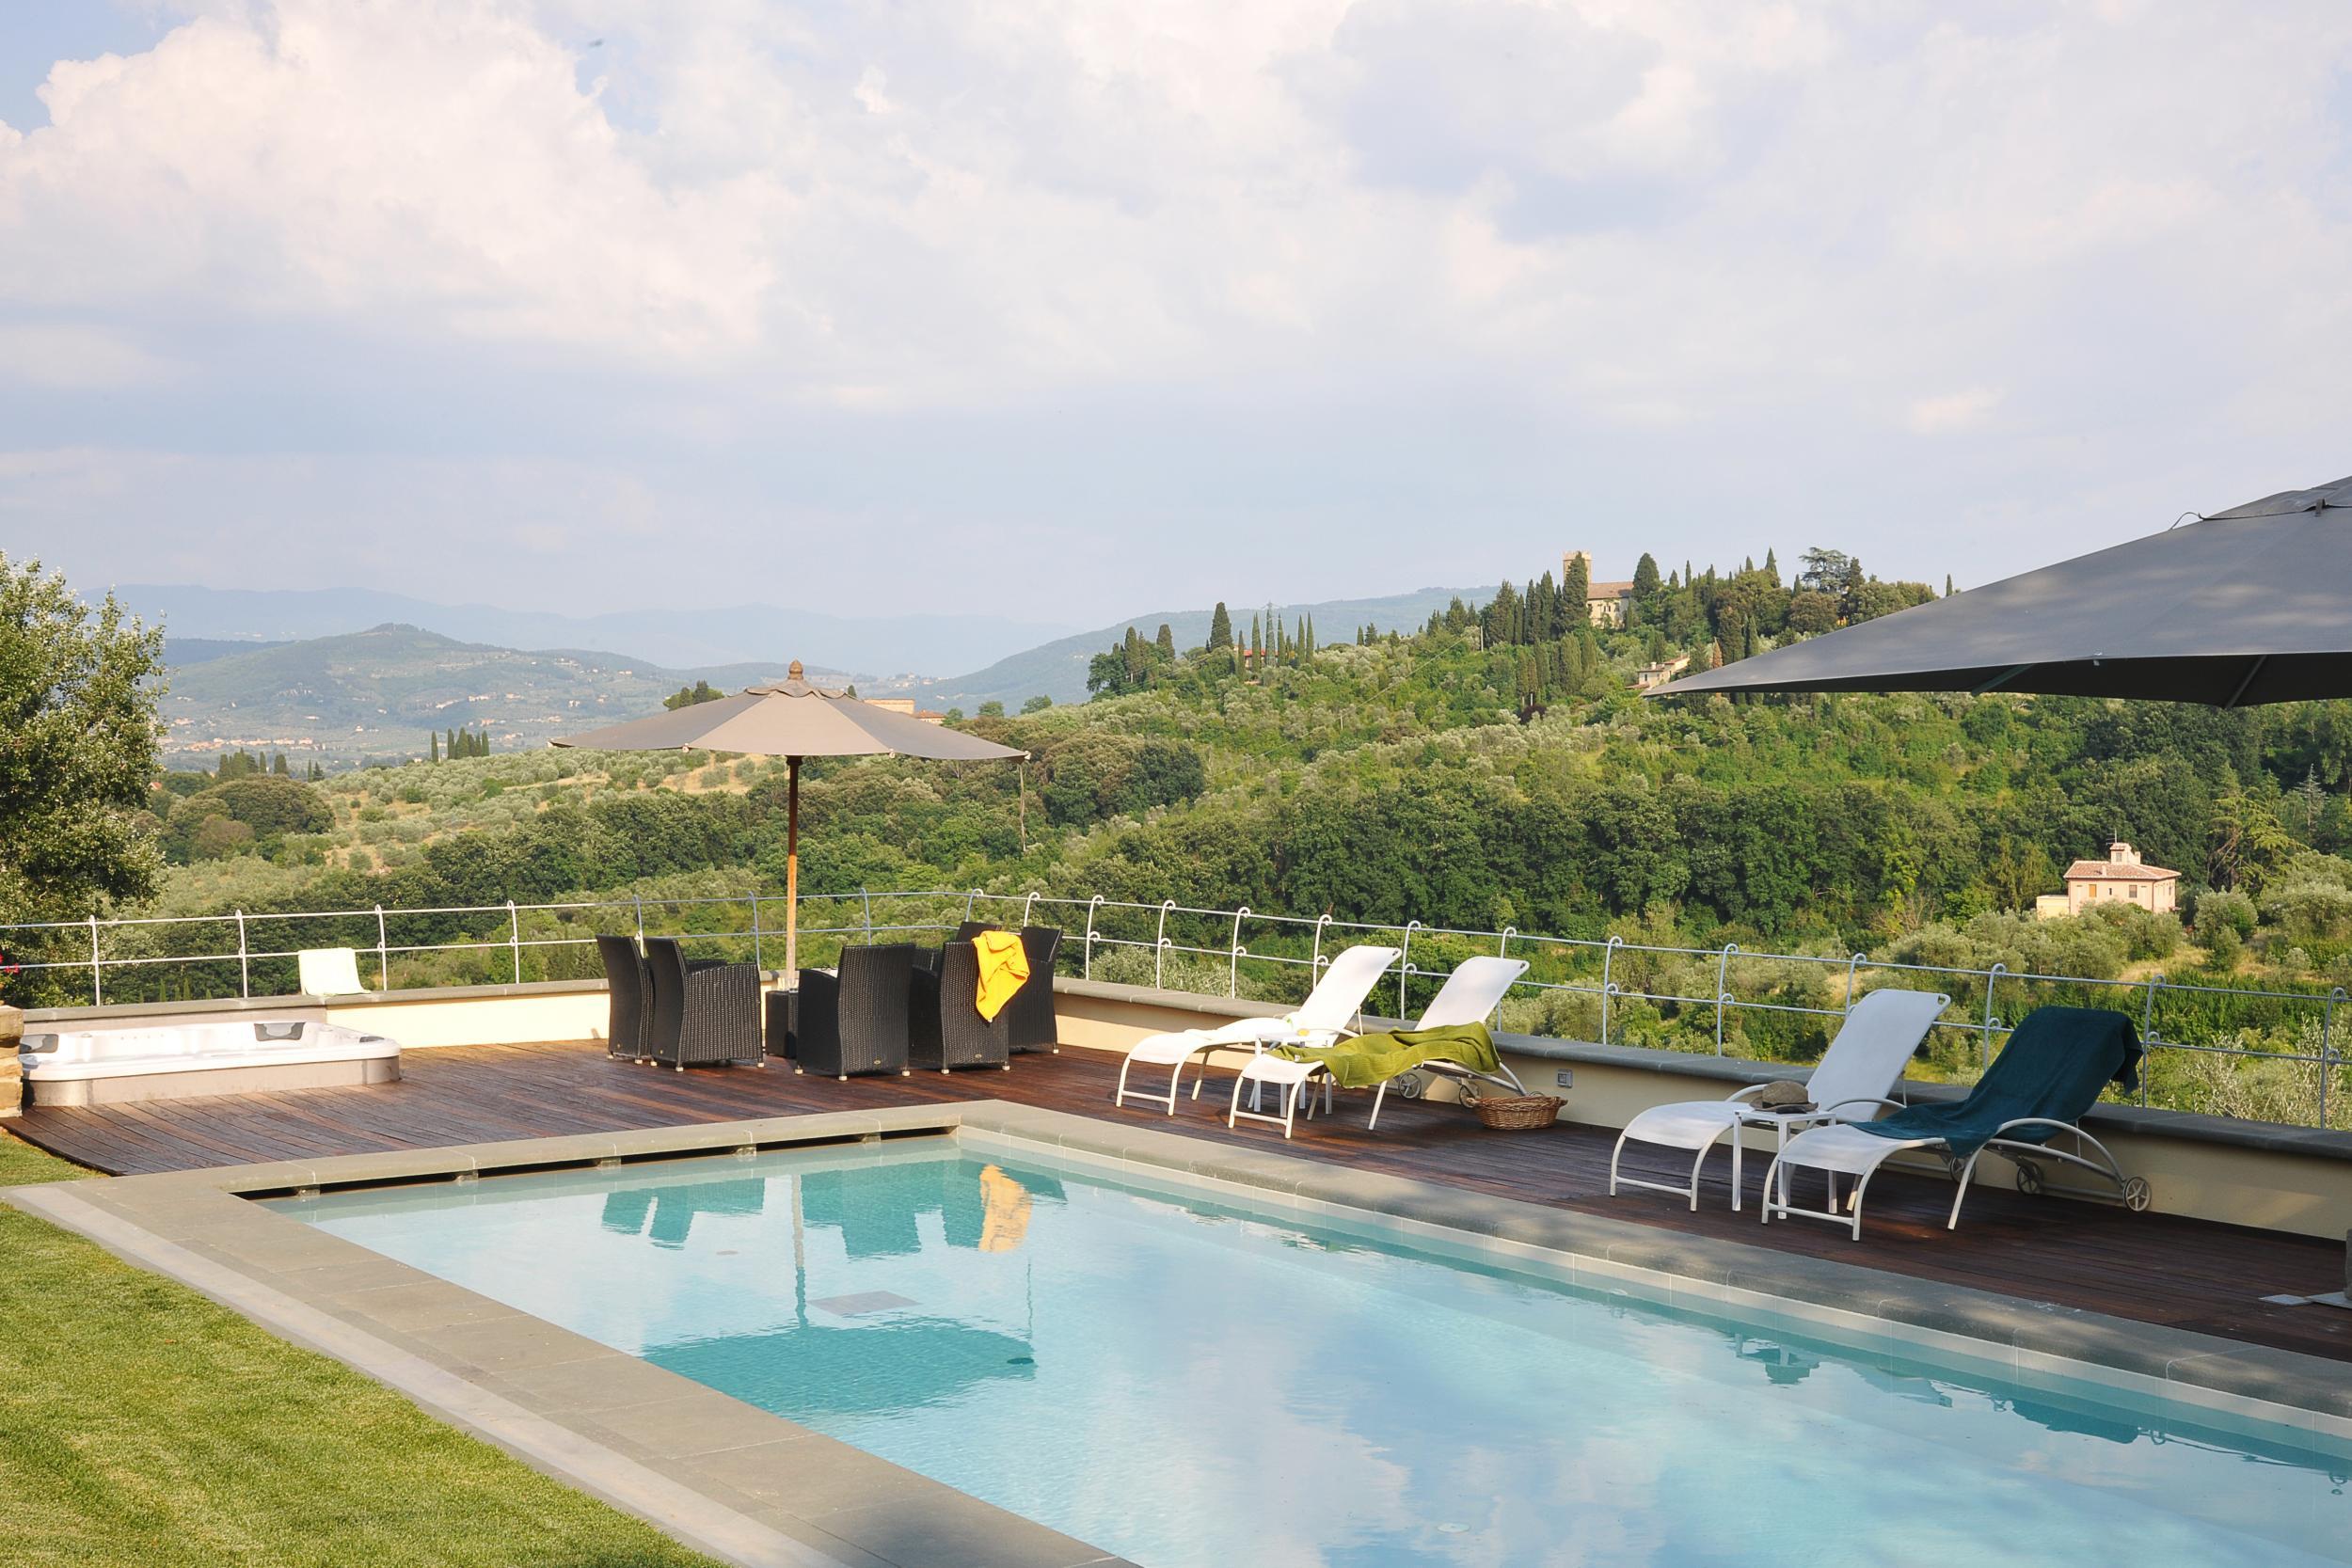 Villa I Giullari is only half an hour's walk from central Florence but feels a world away